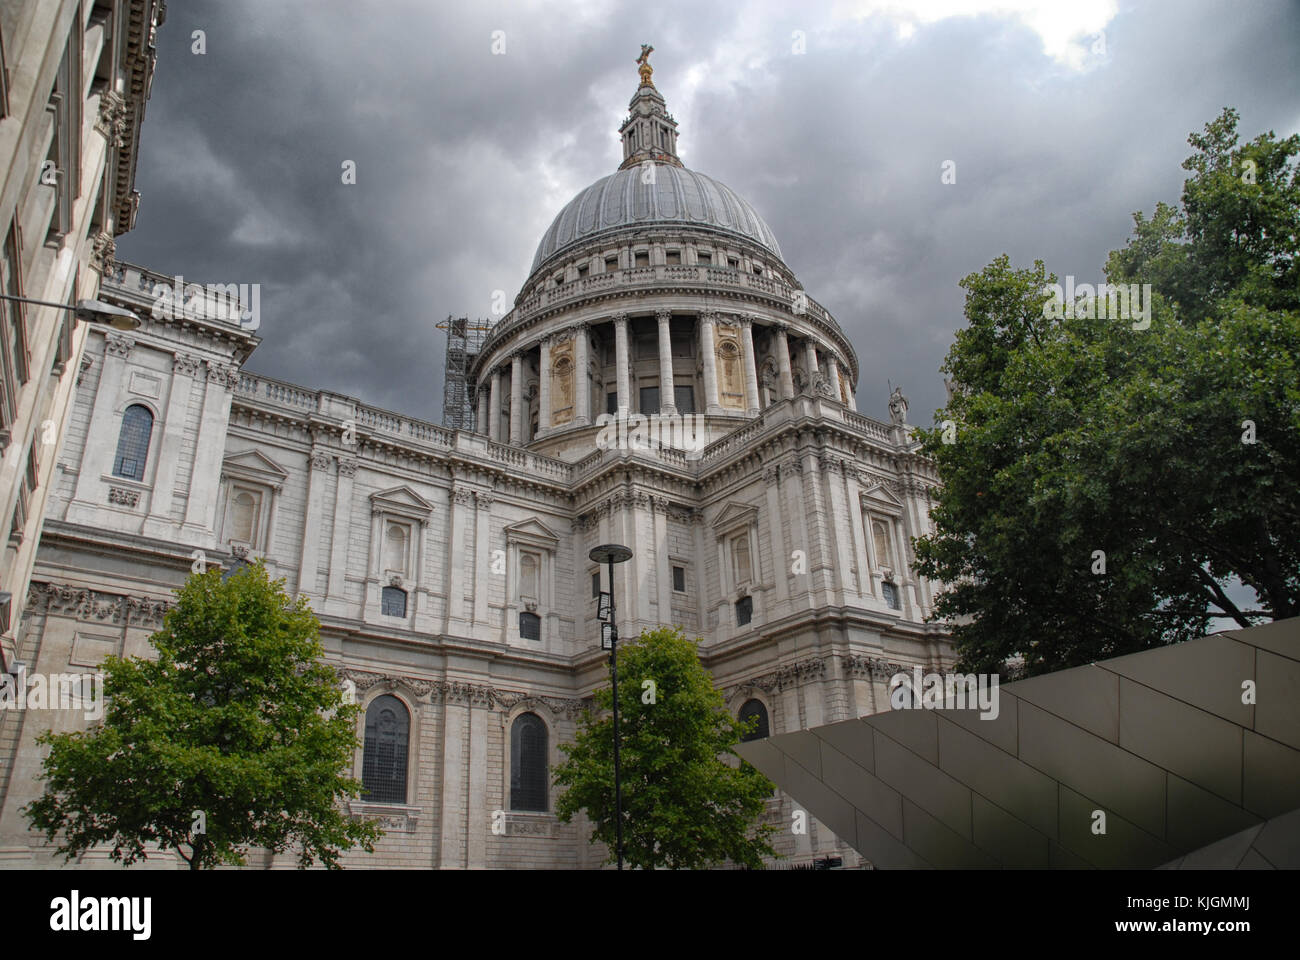 St Paul´s Cathedral under dark clouds seen from below Stock Photo